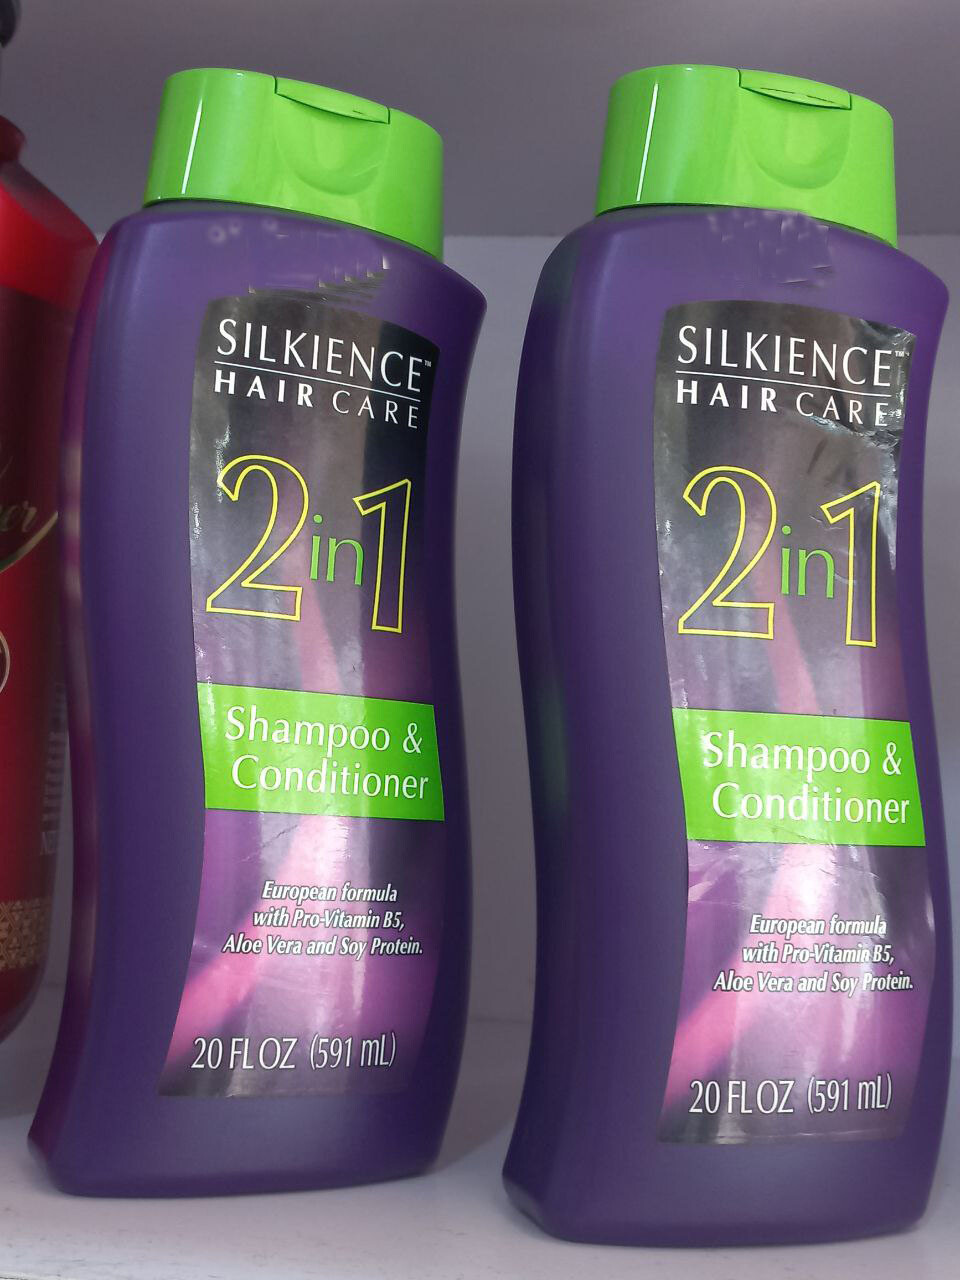 SILKIENCE HAIR CARE Shampoo & Conditioner